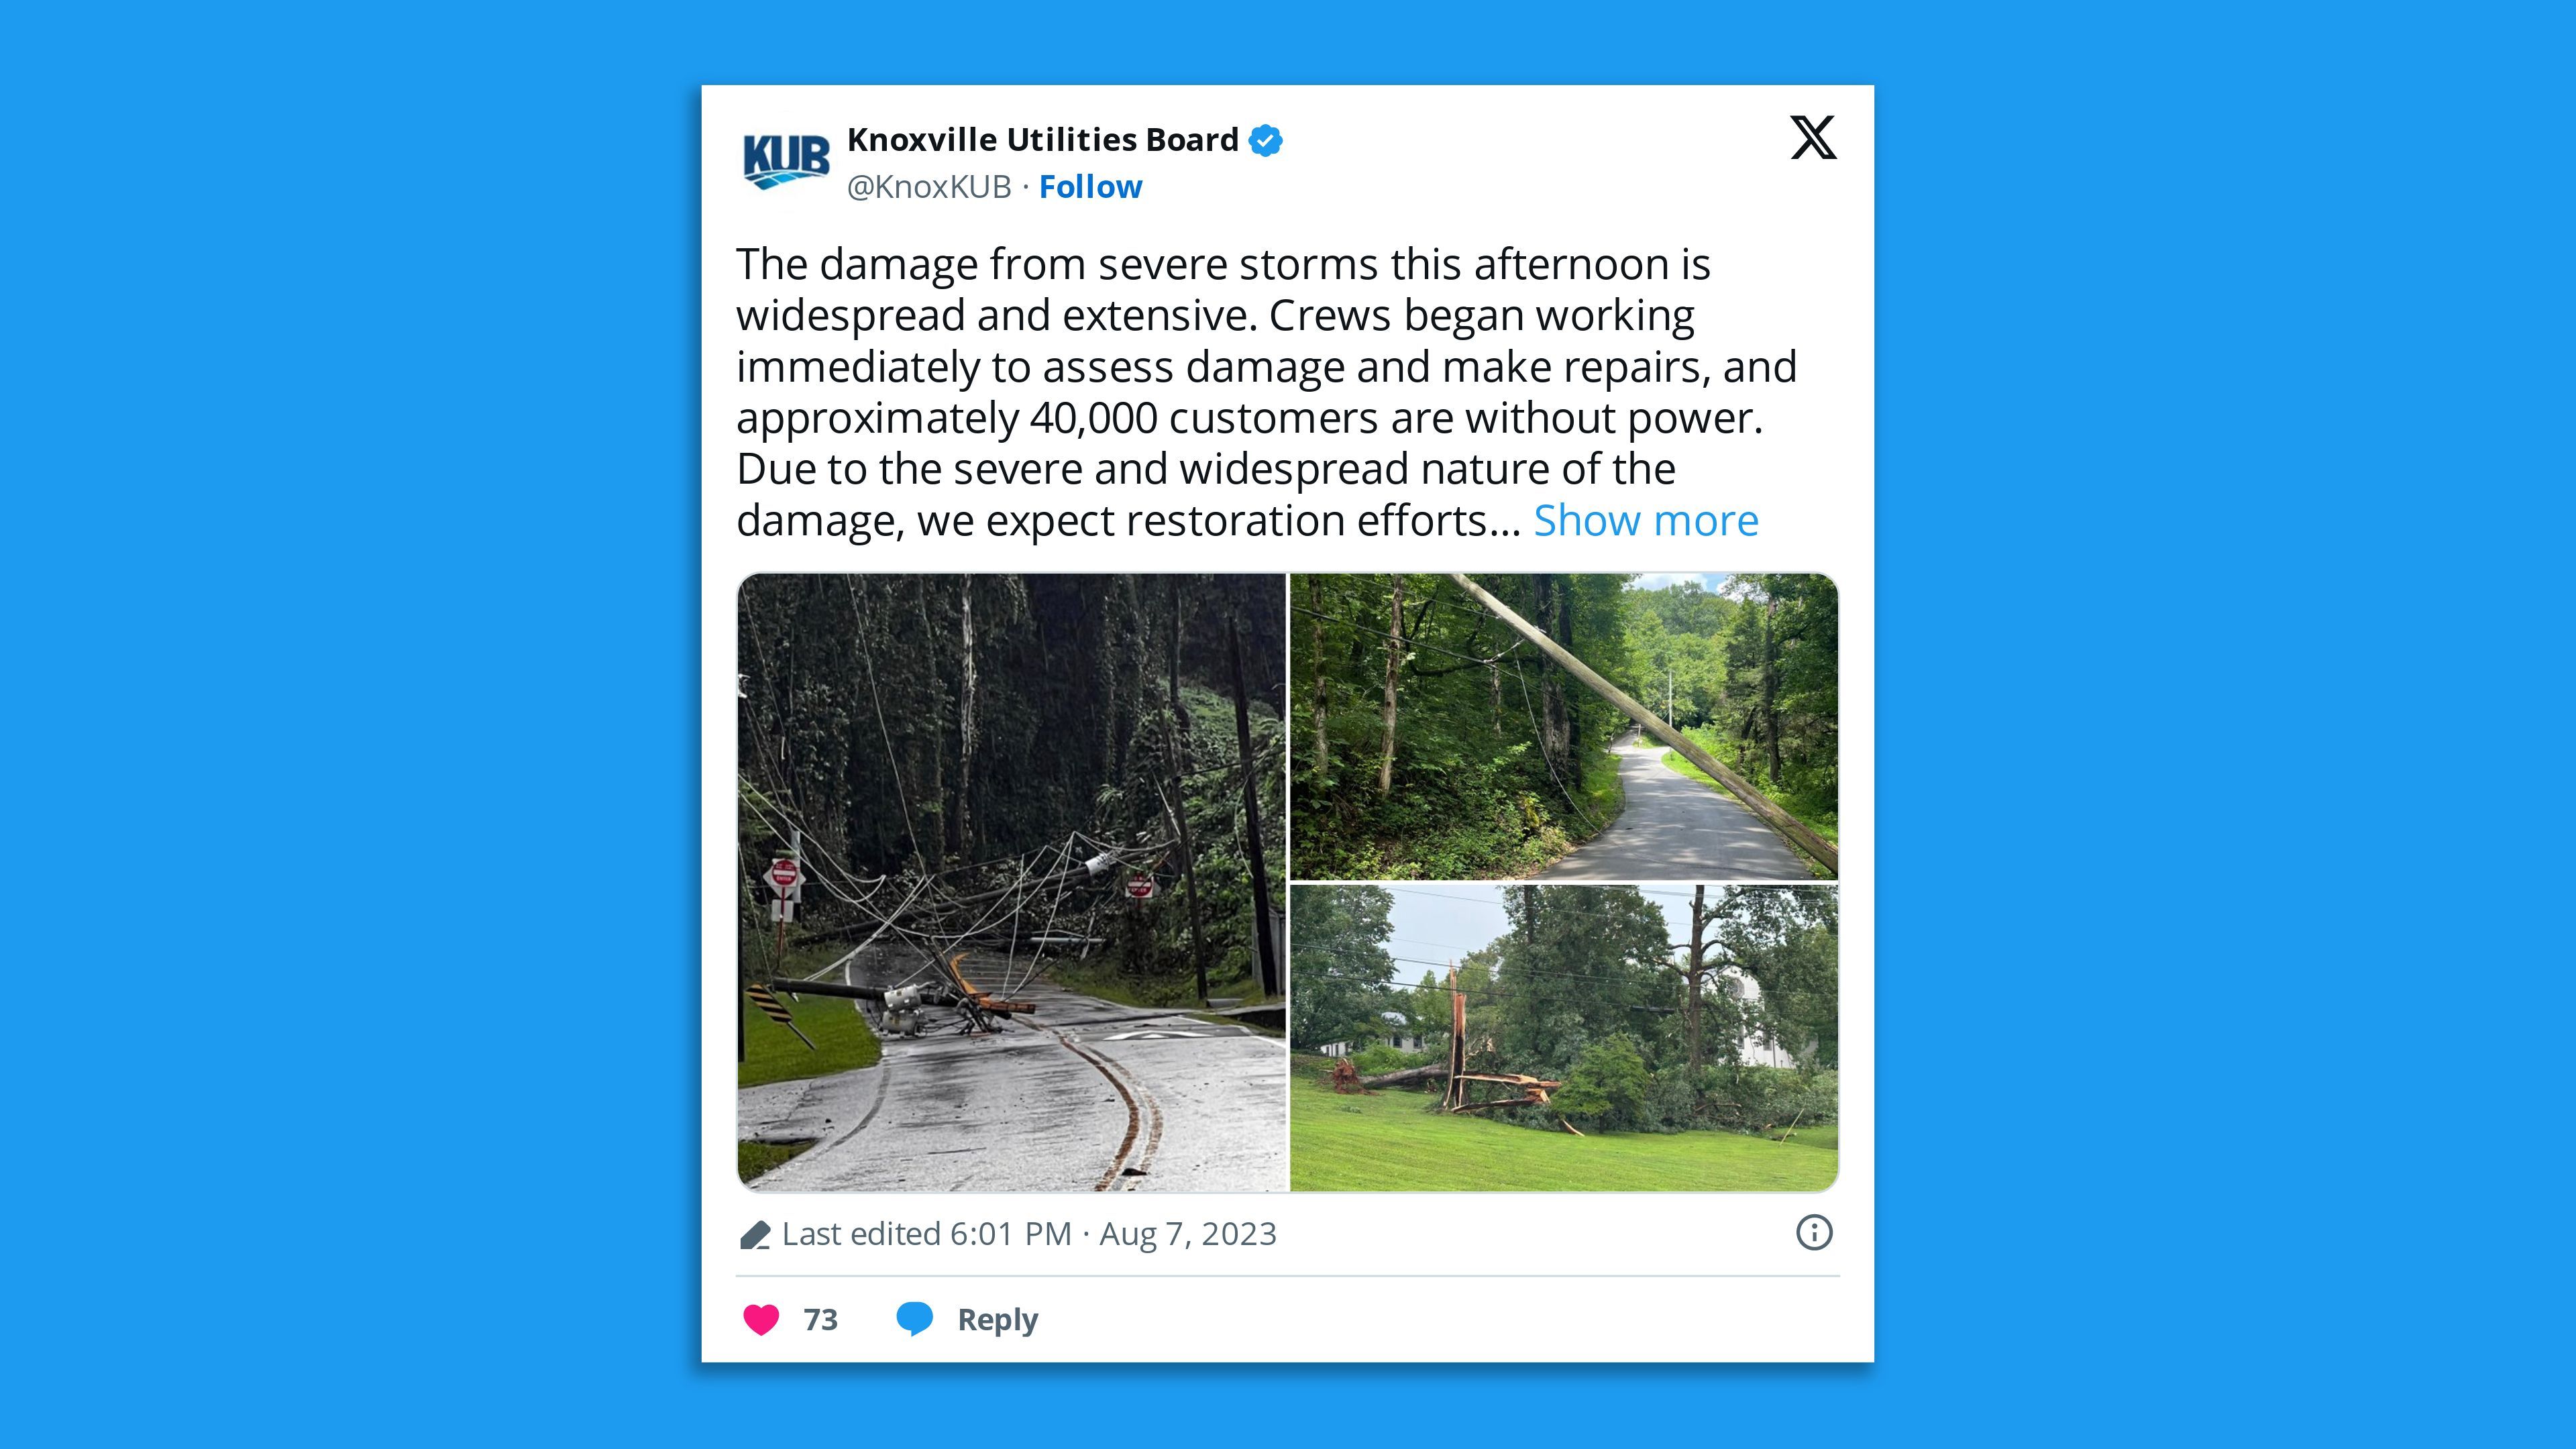 A screenshot of a Knoxville Utilities Board tweet showing power lines and trees damaged by a storm, saying: "he damage from severe storms this afternoon is widespread and extensive. Crews began working immediately to assess damage and make repairs, and approximately 40,000 customers are without power. Due to the severe and widespread nature of the damage, we expect restoration efforts to span multiple days. Estimated restoration times will become available tomorrow once damage has been assessed.  Customers may be experiencing technical issues at https://kub.org/outage/map and our mobile app, and we're working to resolve these as quickly as possible."